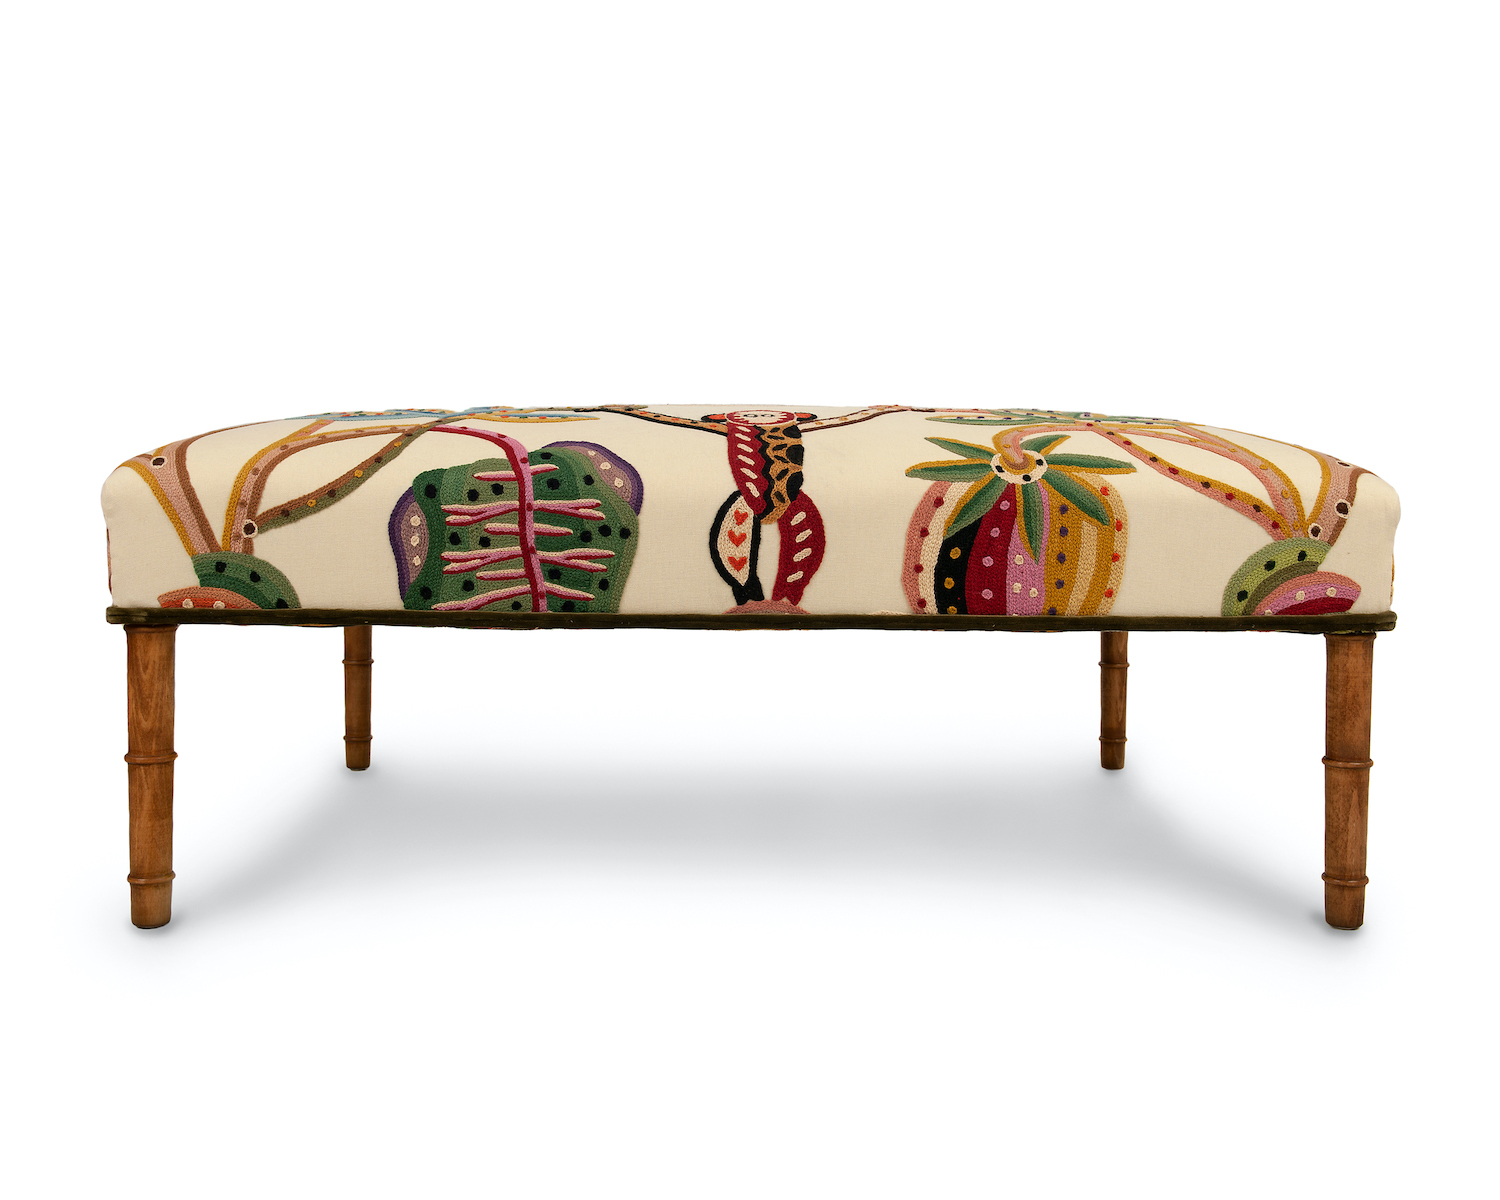 Crewel Wool Embroidered Footstool with Velvet Double Piping and Bamboo Style Legs